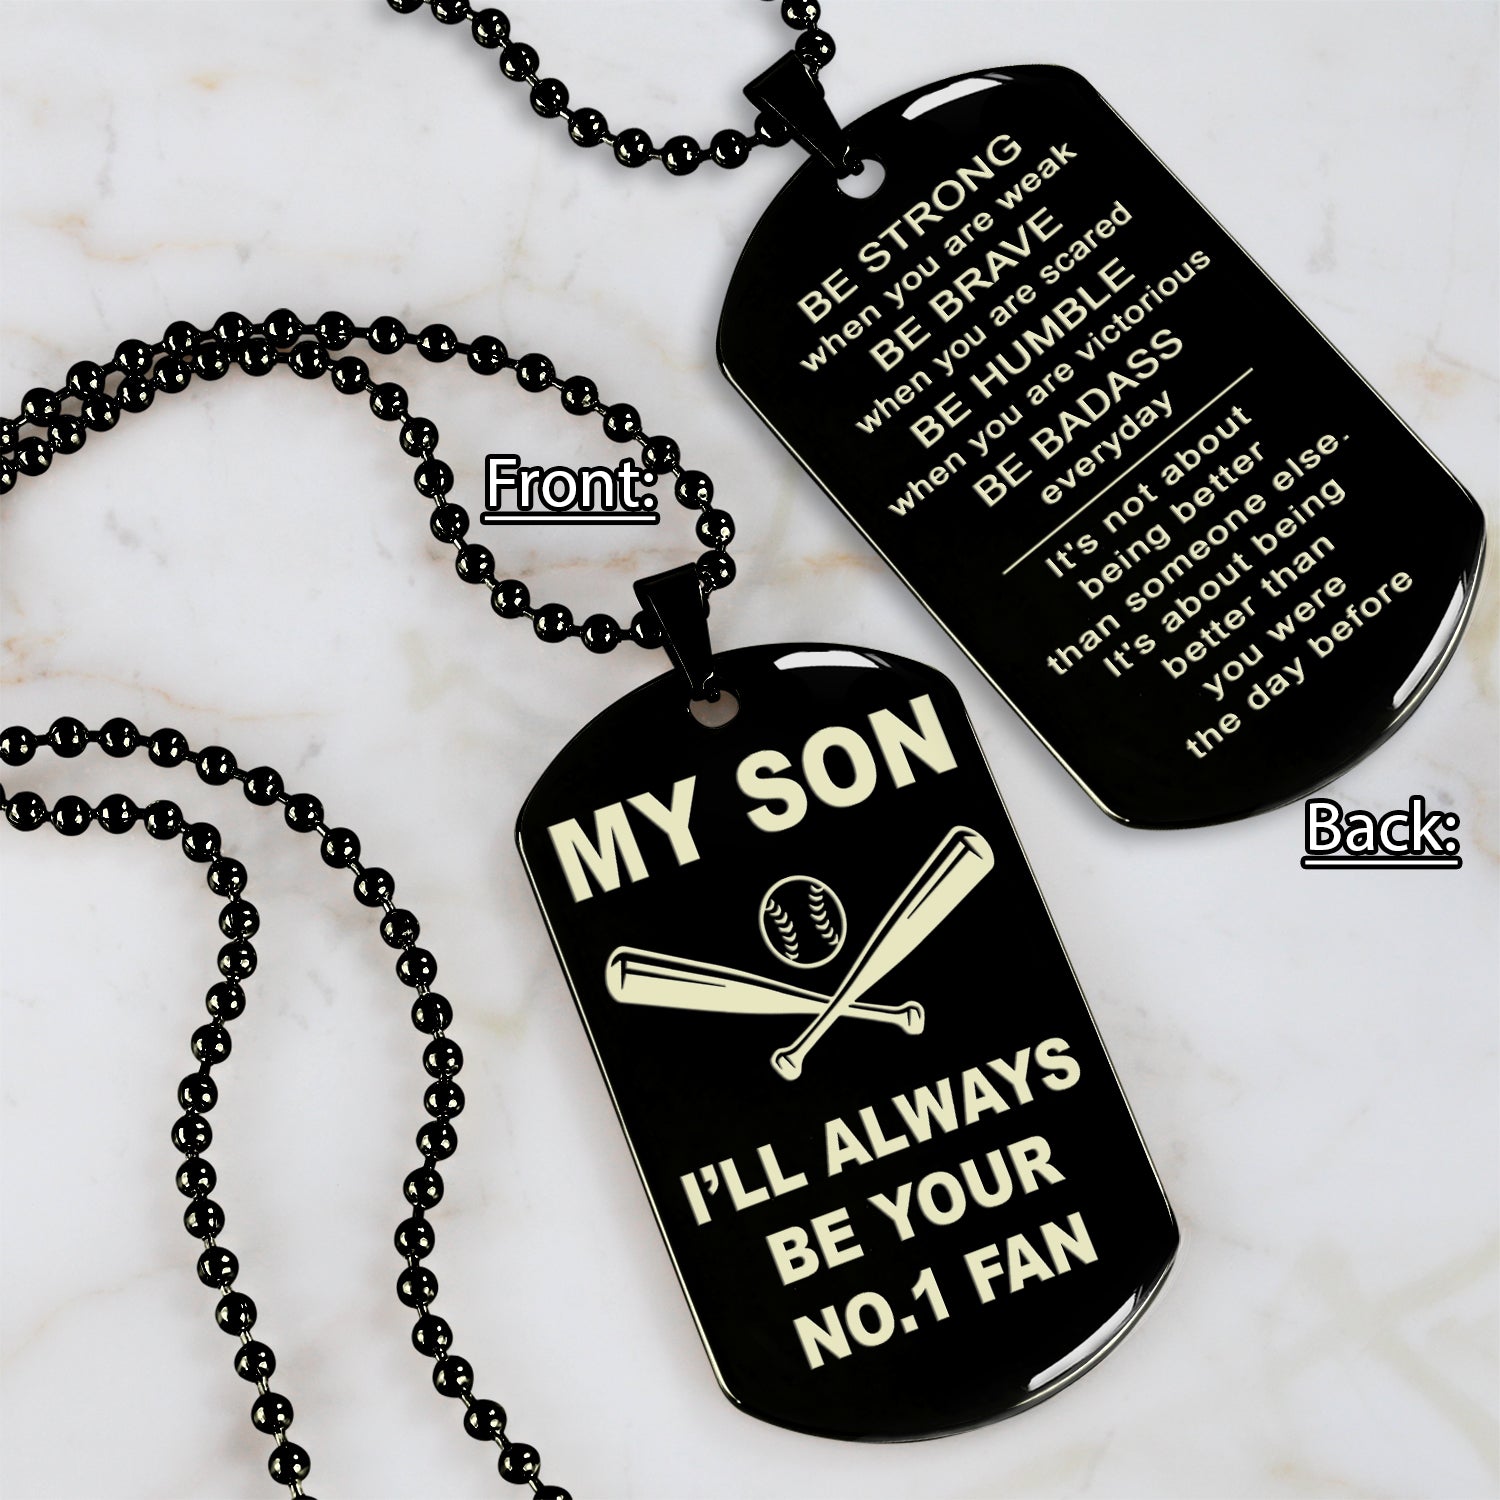 Baseball customizable engraved double sided dog tag gifts from dad mom to son, Be strong be brave be humble, It is not about better than someone else, It is about being better than you were the day before